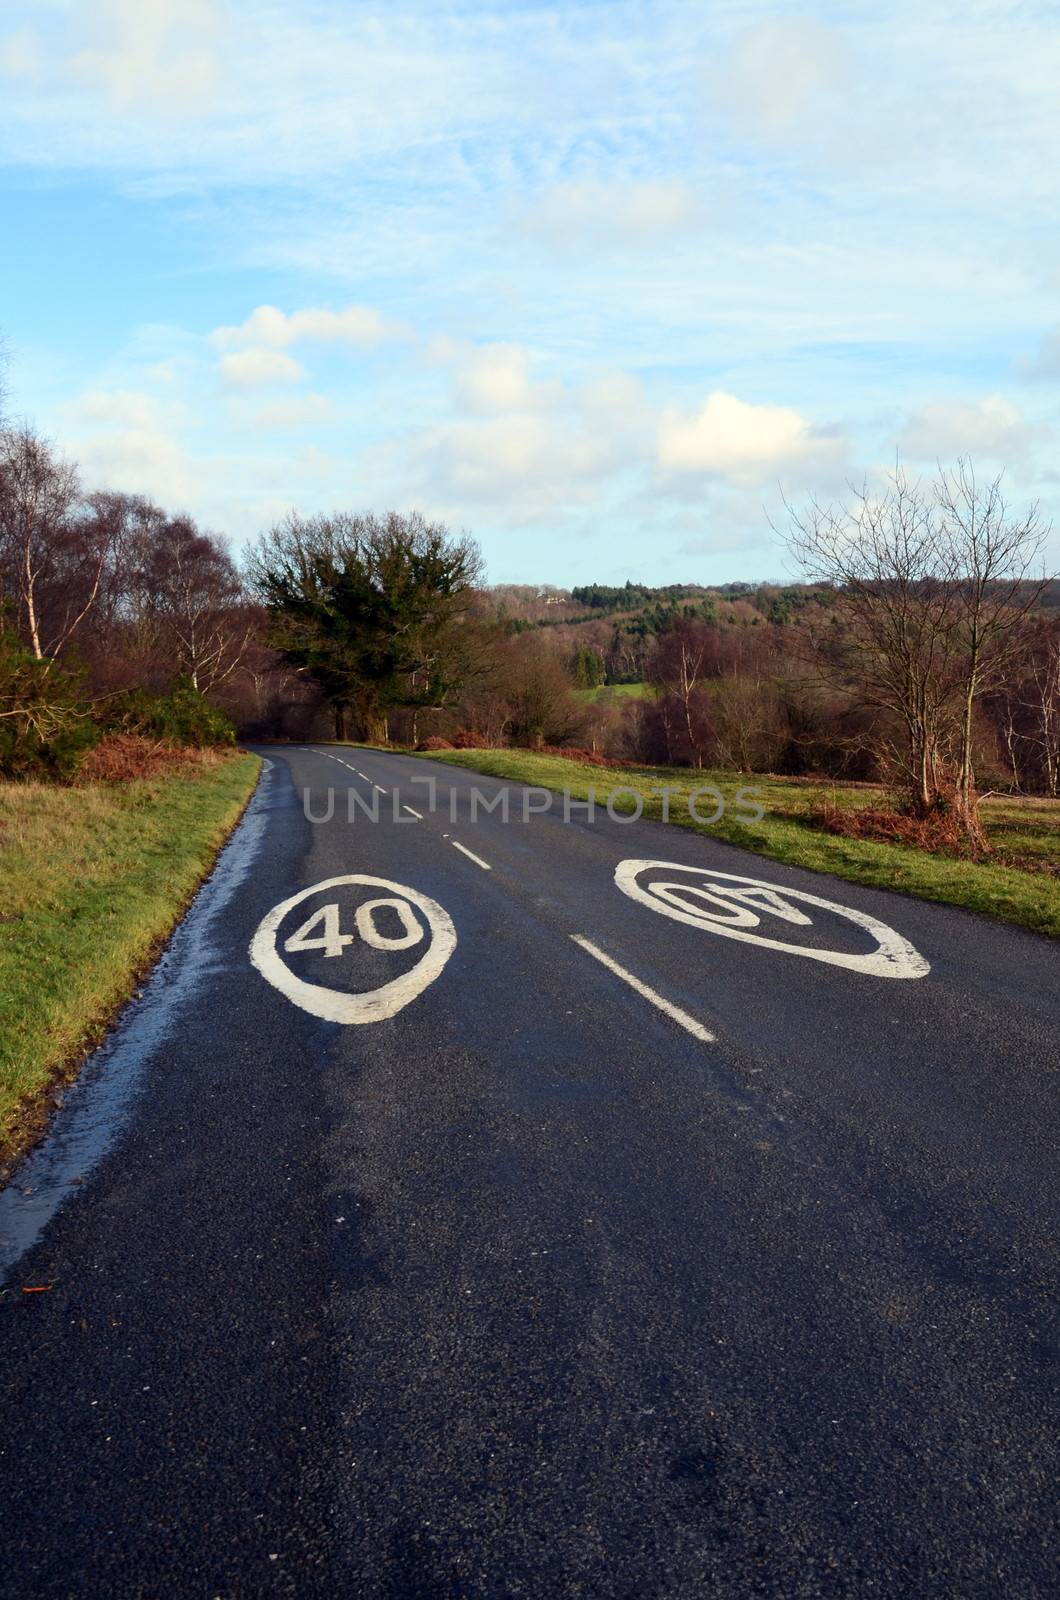 Along a stretch of road in Ashdown Forest Sussex,England speed restriction signs are painted onto the tarmac.